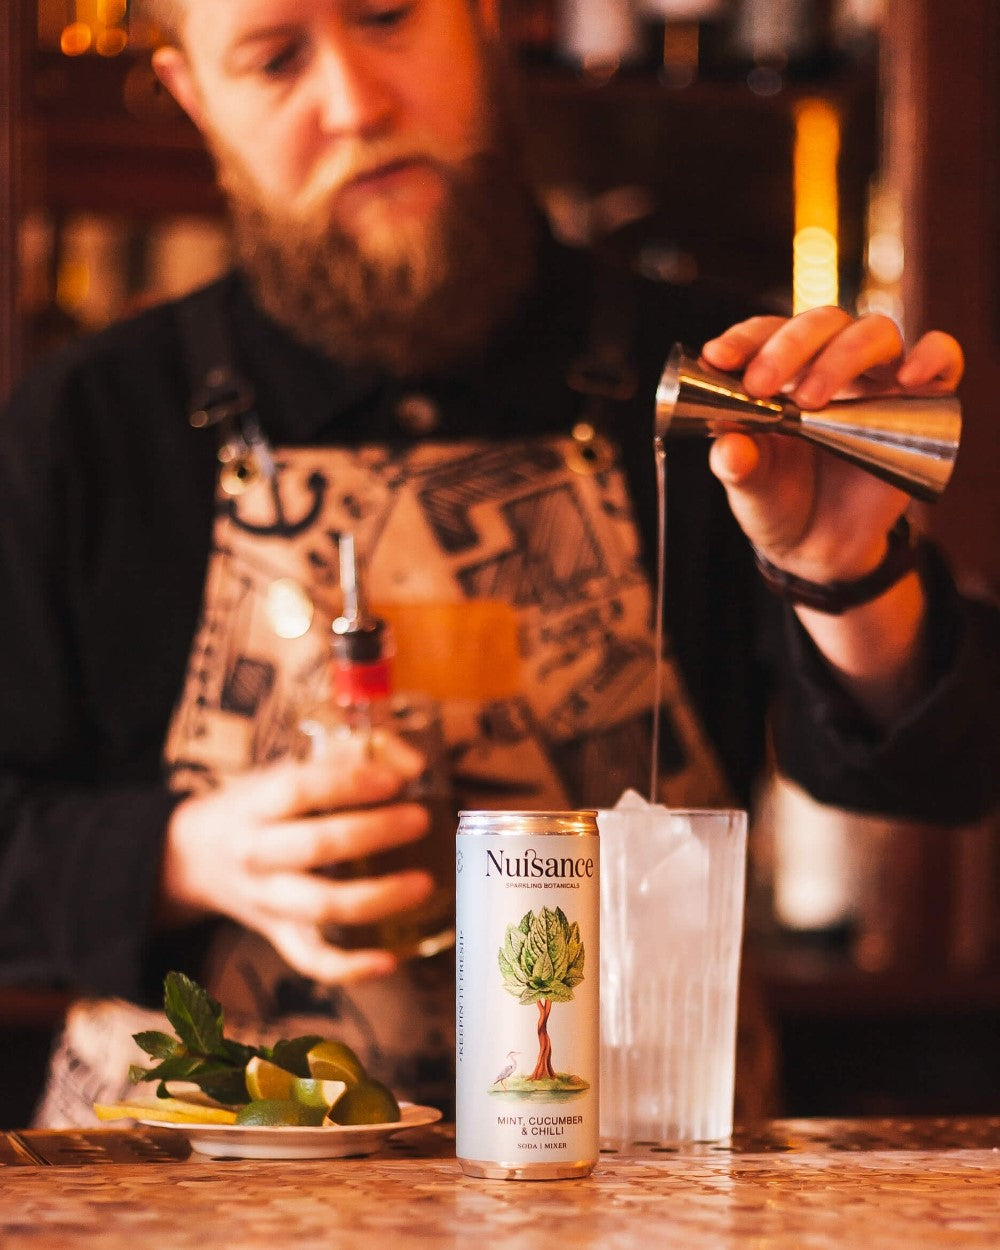 A Cocktail Barman making a cold cocktail of Tequila, Lime juice, sugar syrup and topping it with a refreshing can of premium Mint, Cucumber and Chilli botanical soft drink. from Scotland-based drinks start-up brand Nuisance drinks